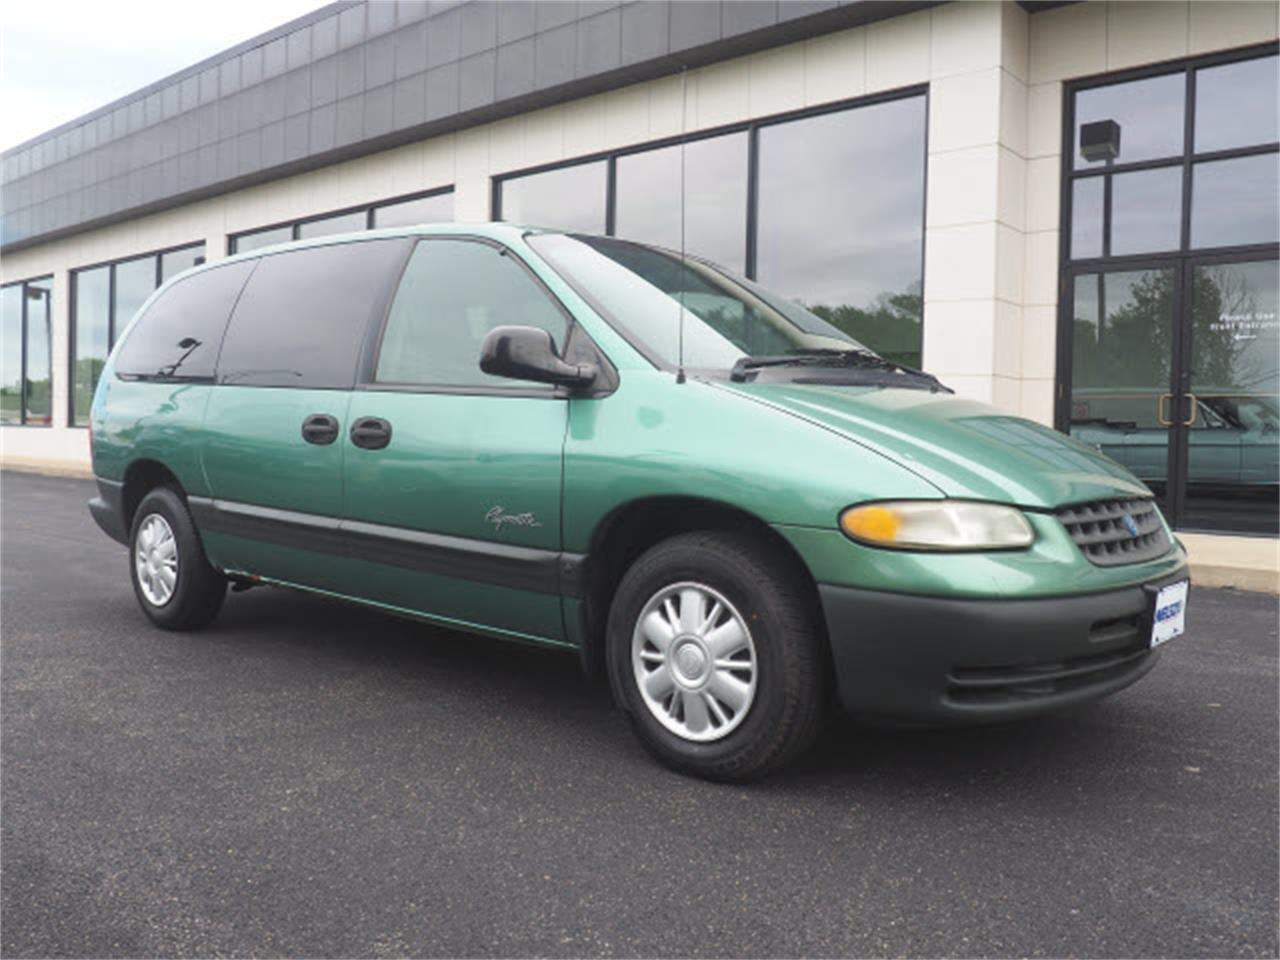 1998 Plymouth Grand Voyager for Sale | ClassicCars.com | CC-1104358